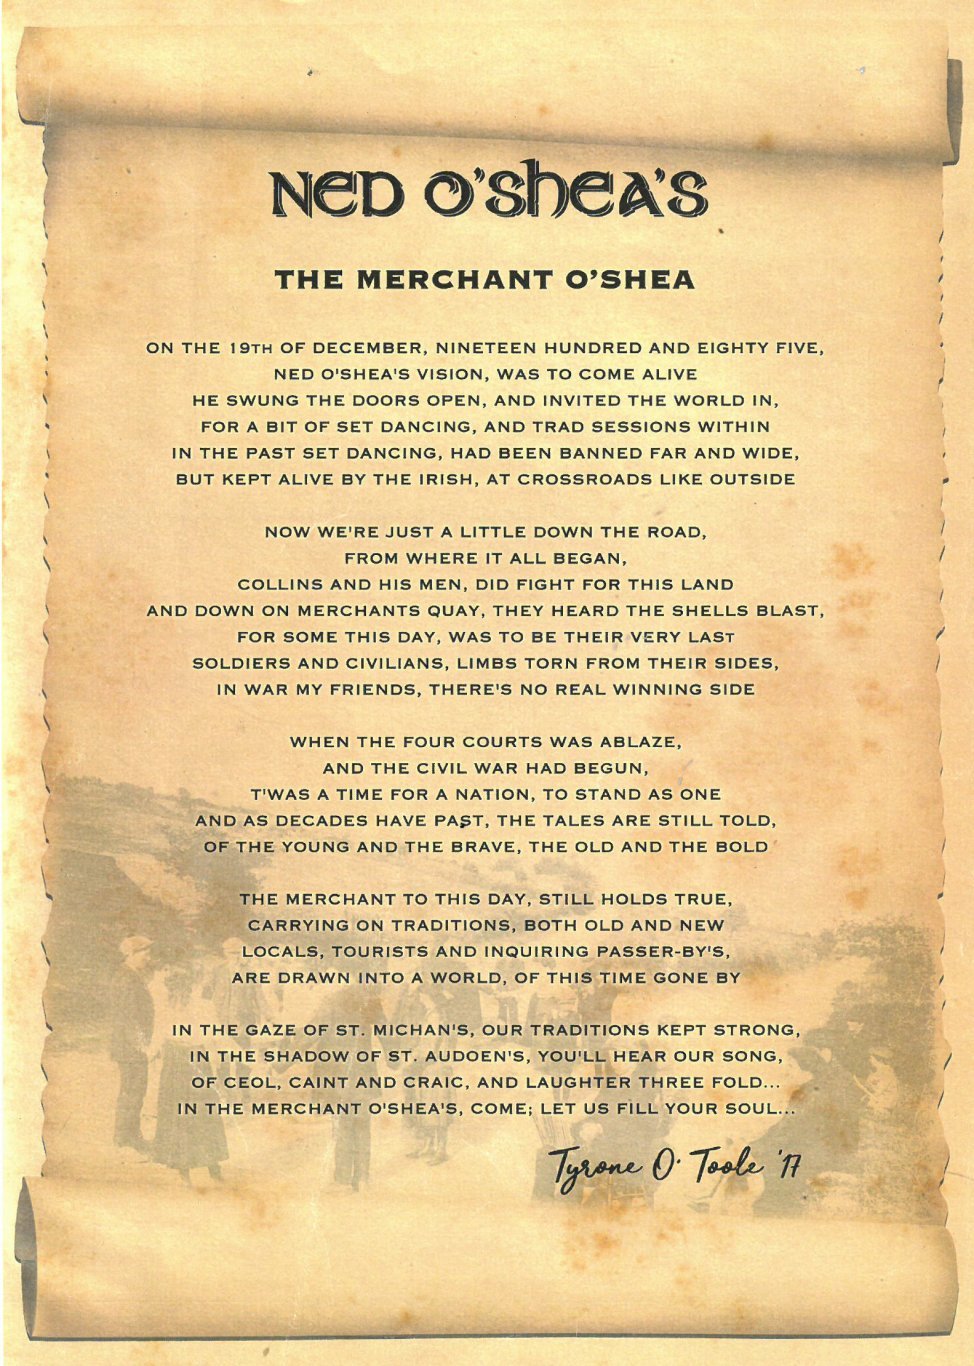 DoDublin's Bus guide/driver and poet Tyrone's poem on the Ned O'Shea's pub.